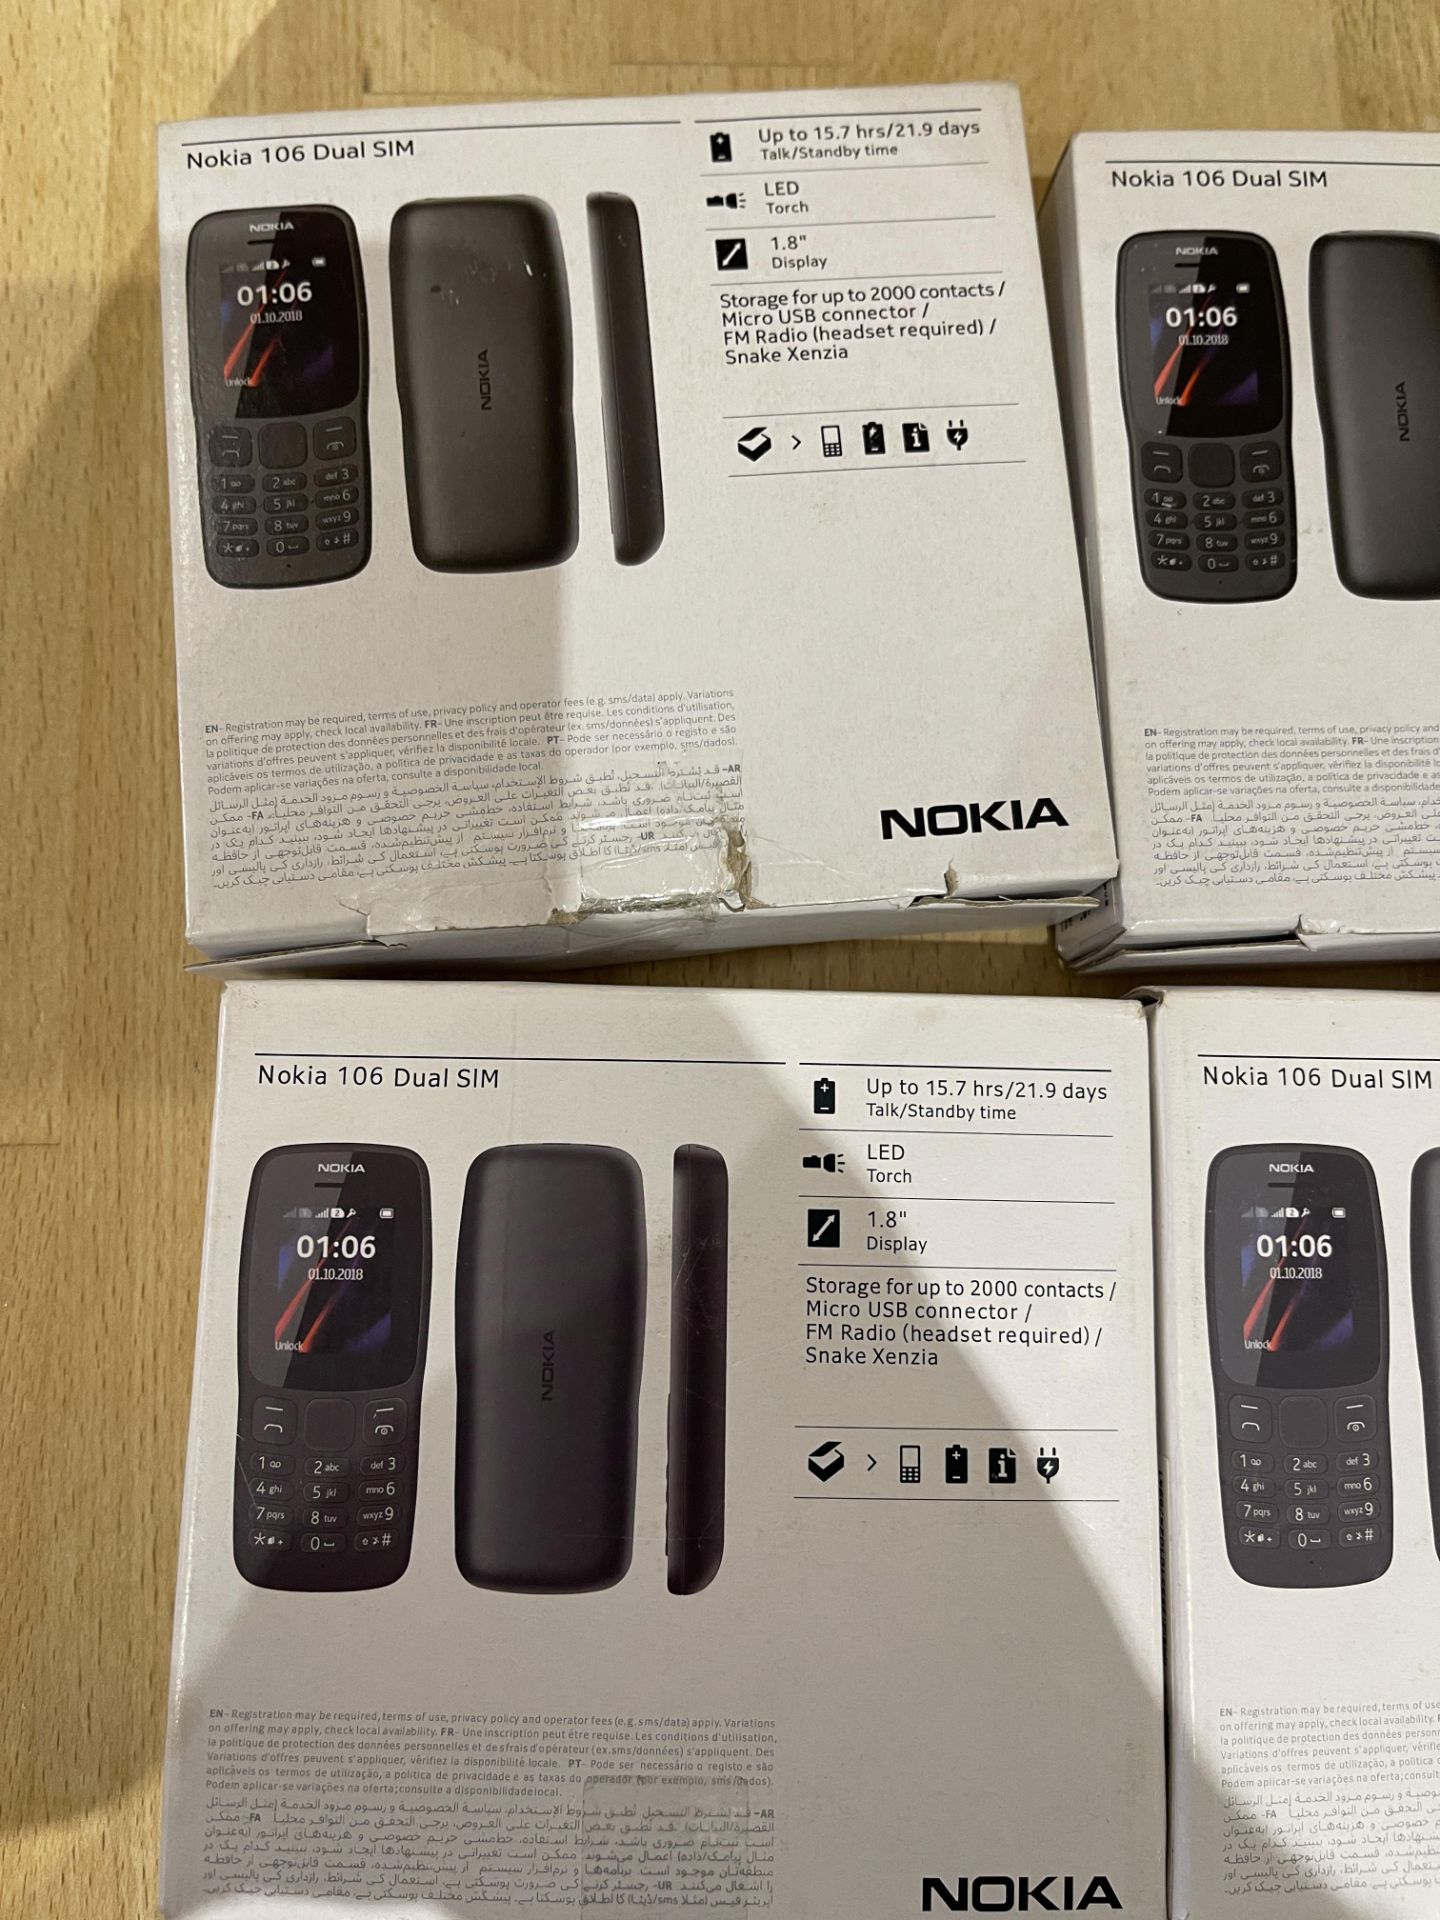 10: Nokia 106 Dual Sim Mobile Phones, Boxes Have Been Opened, Phone, Battery & Charger All Present - Image 2 of 9